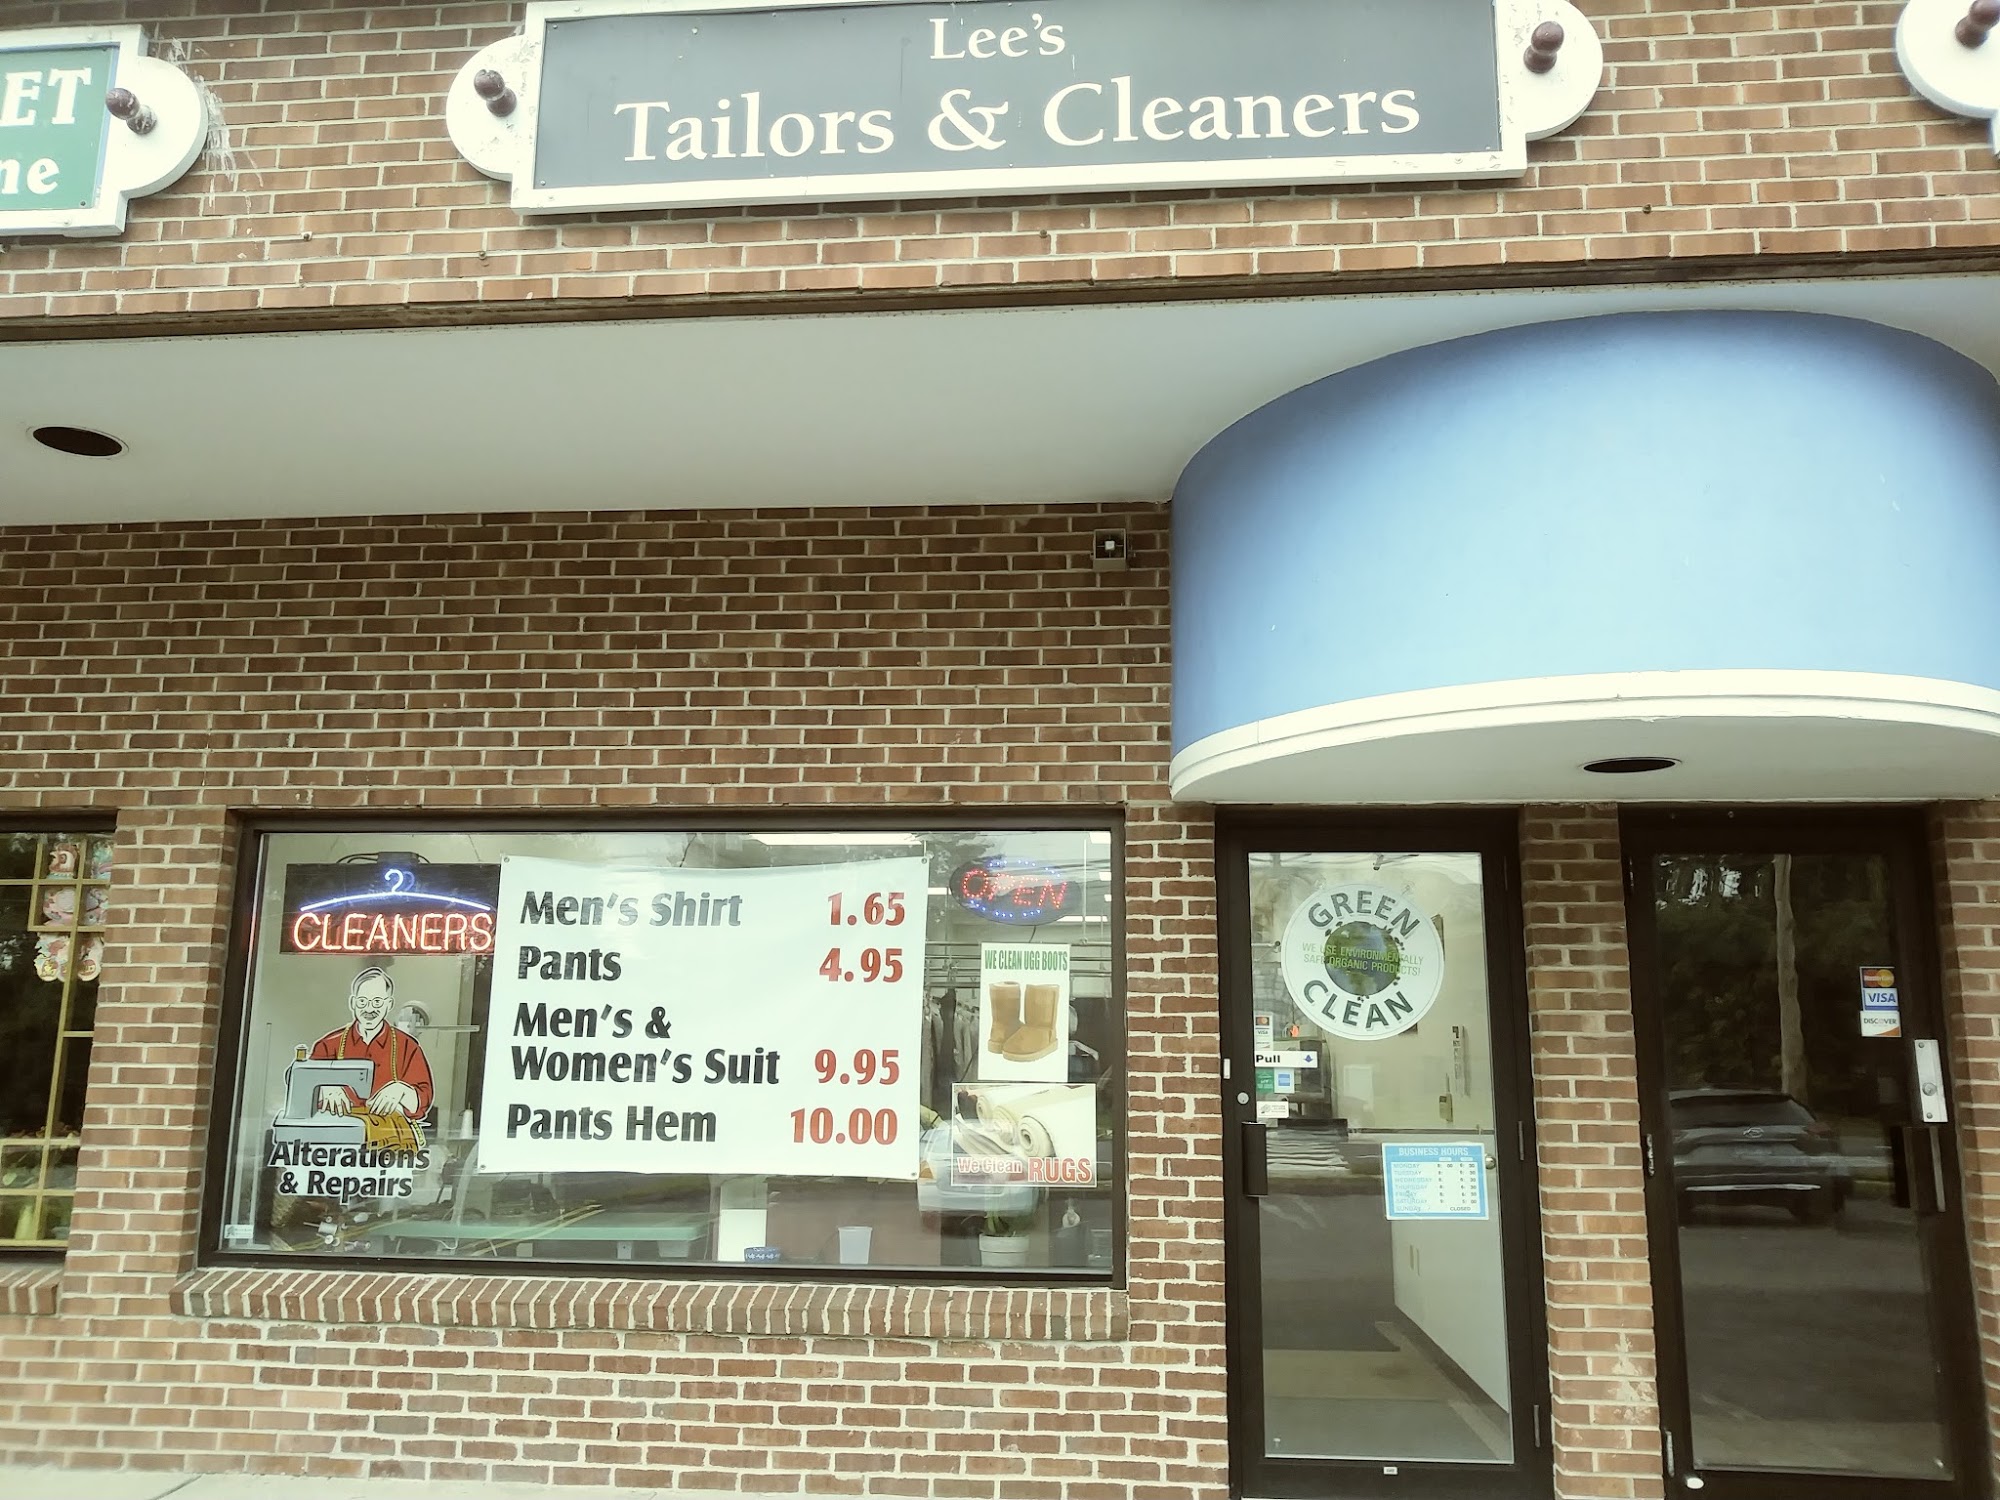 Lee's Tailors & Cleaners